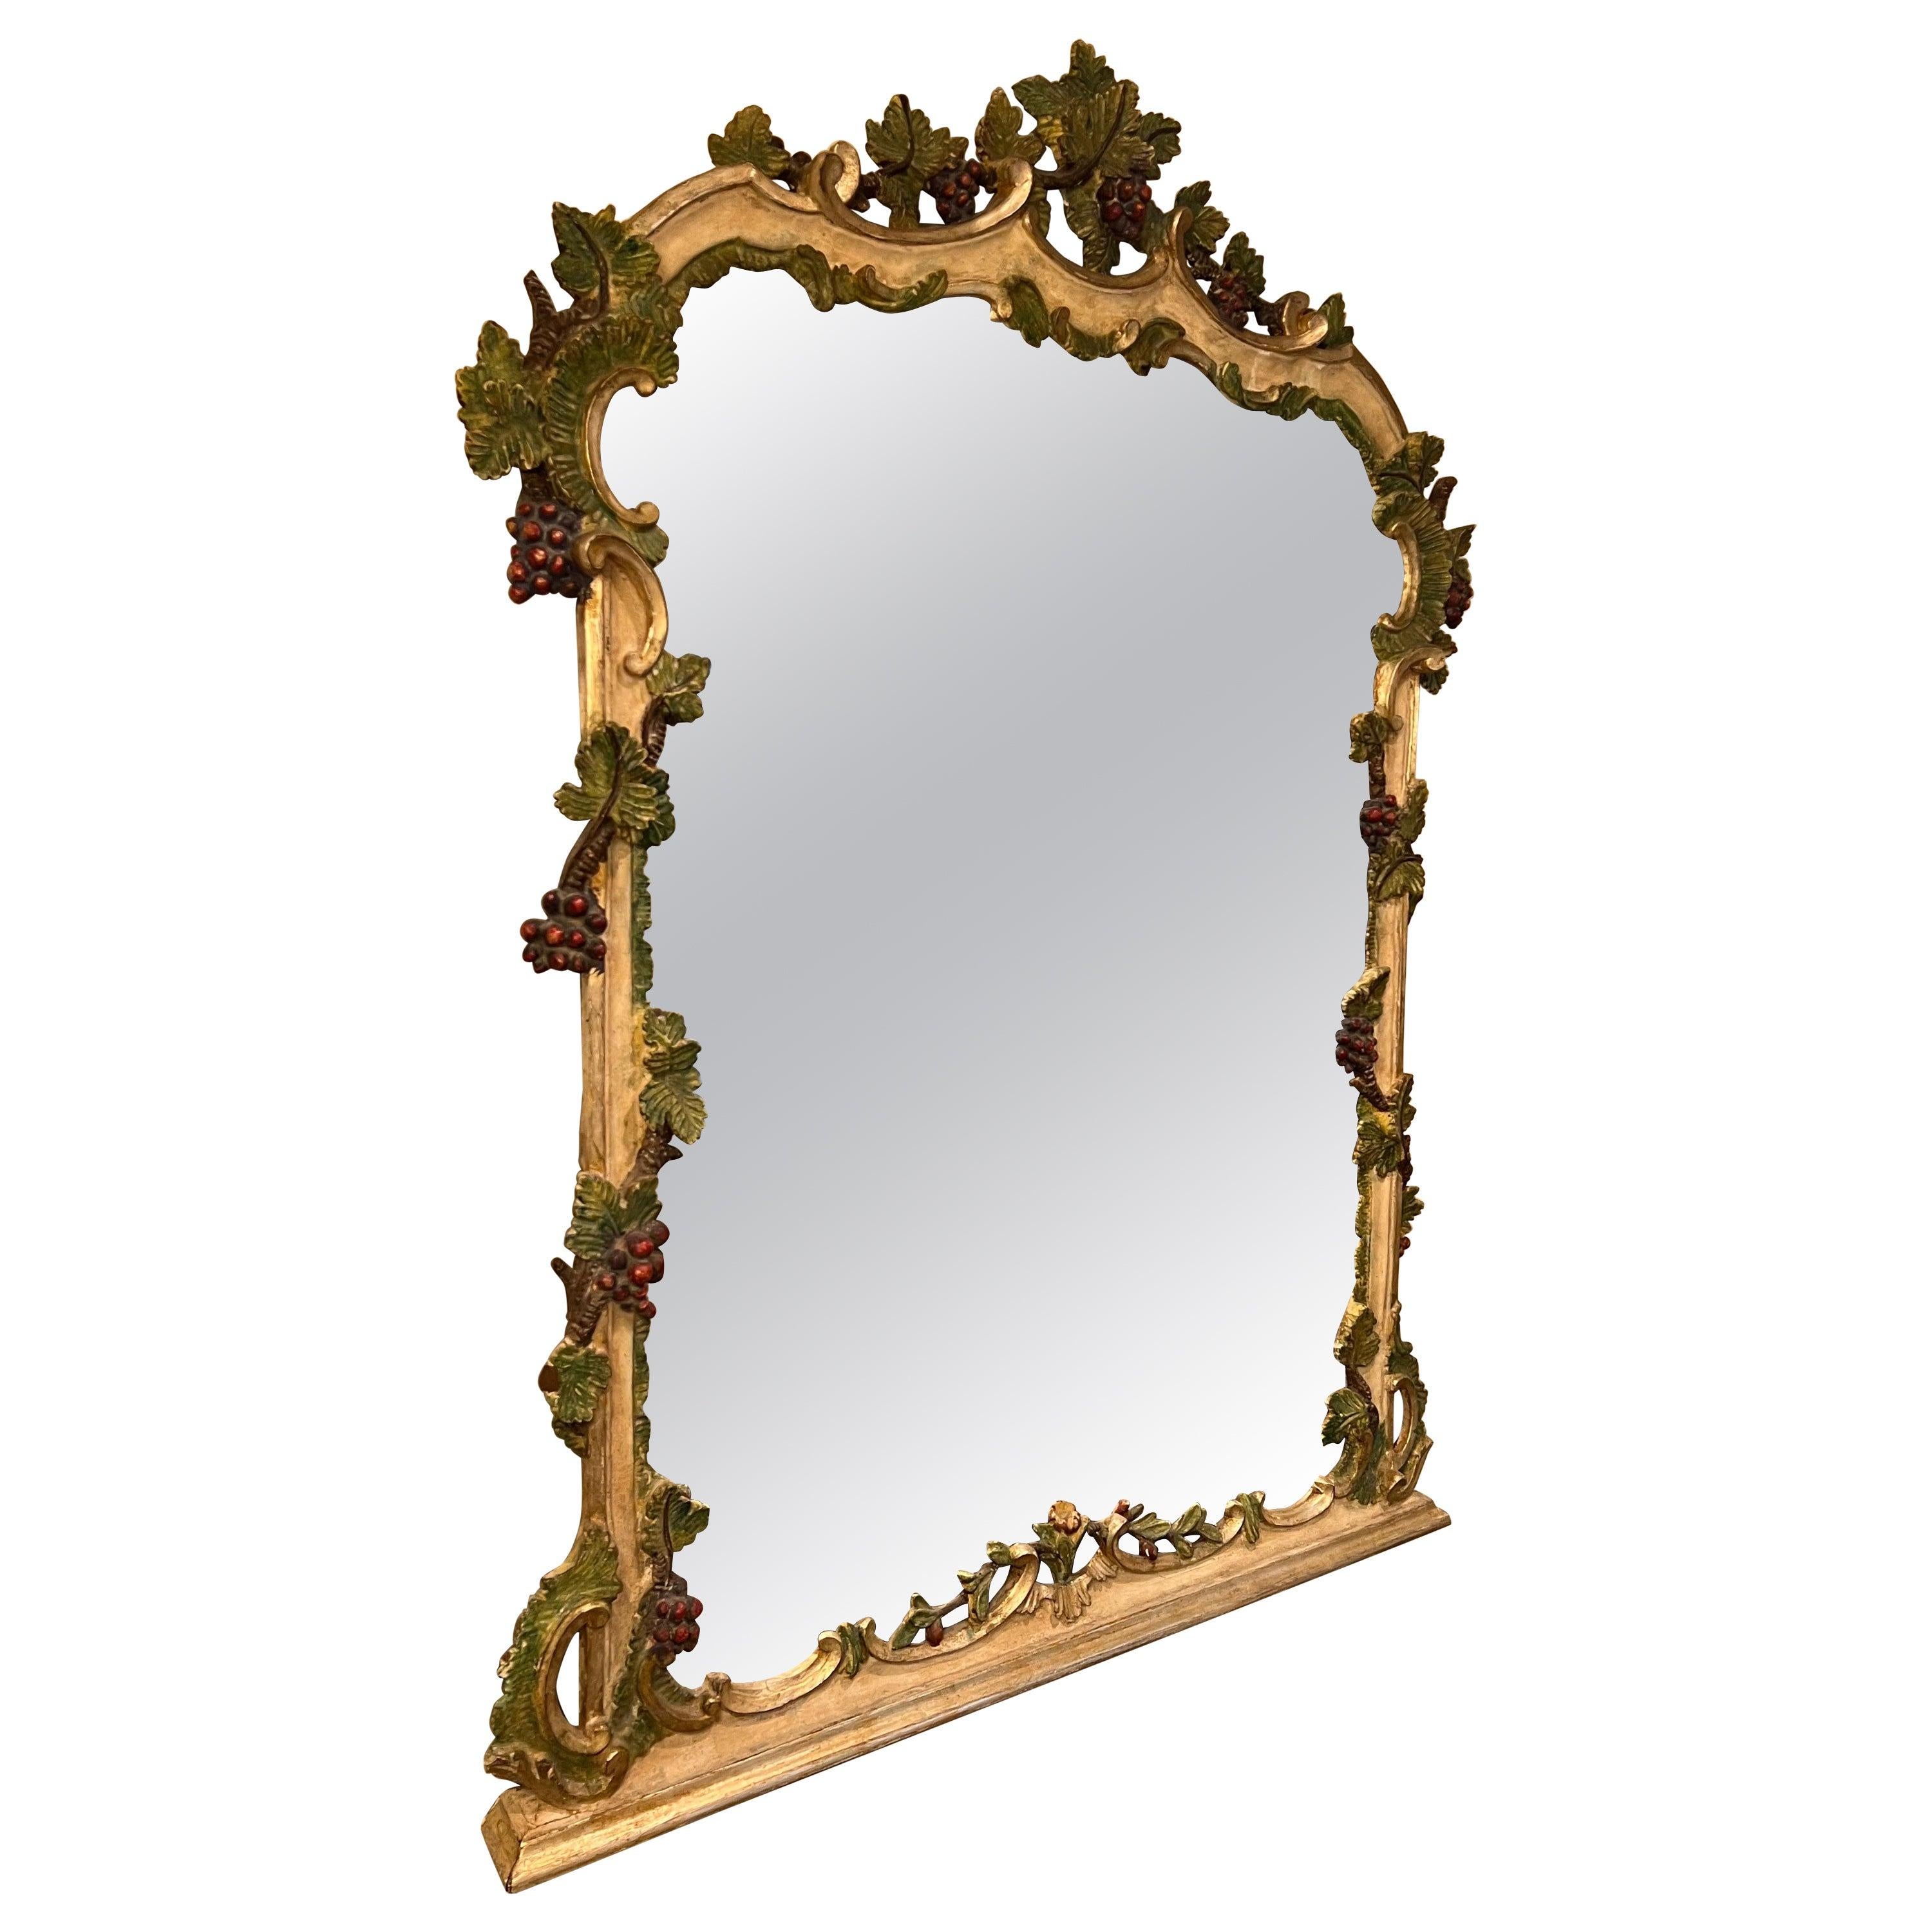 Elaborately Hand Carved French grape vine mirror. Amazing detail to this fine mirror. Intricately carved grapes and vines throughout. Polychromed surface in silver, green and berry color. Nice ample size. Use above a dresser or Mantel, front